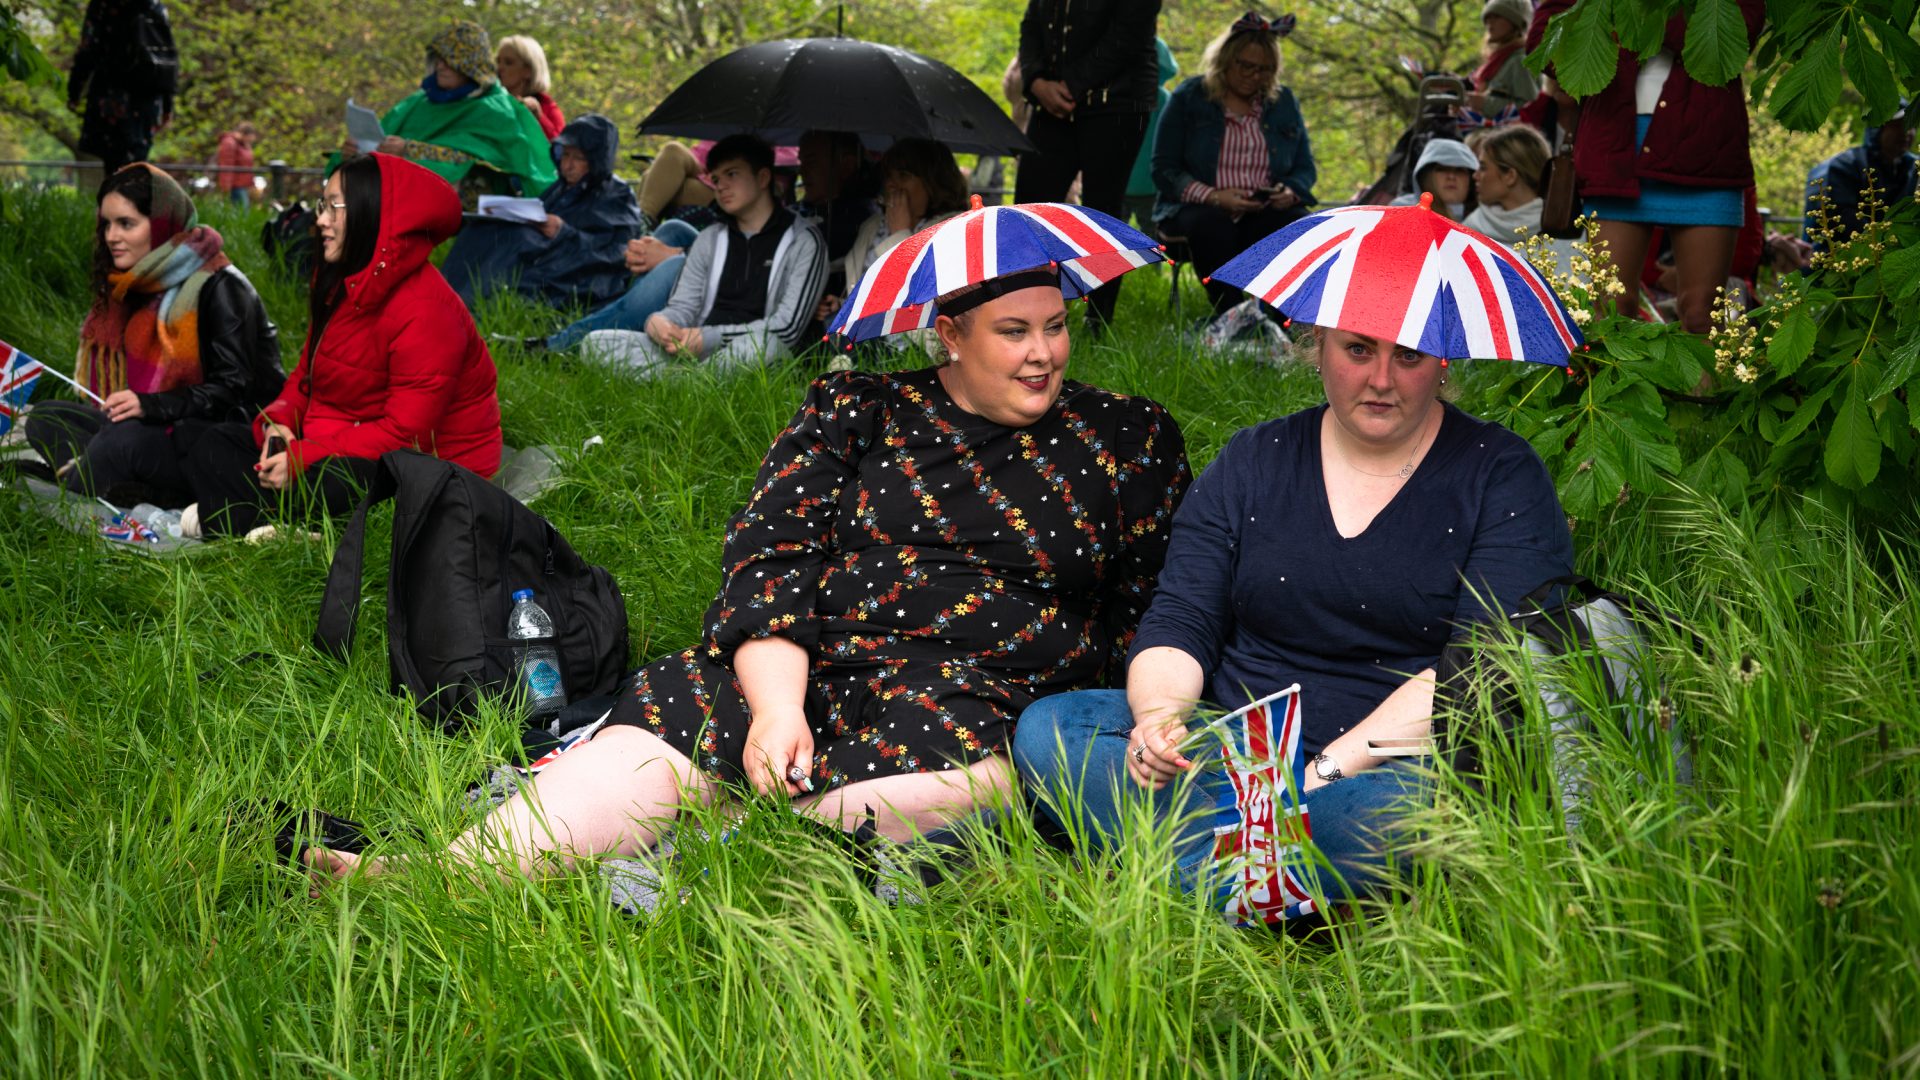 Two women wearing Union Jack umbrella hats sit in a park with others